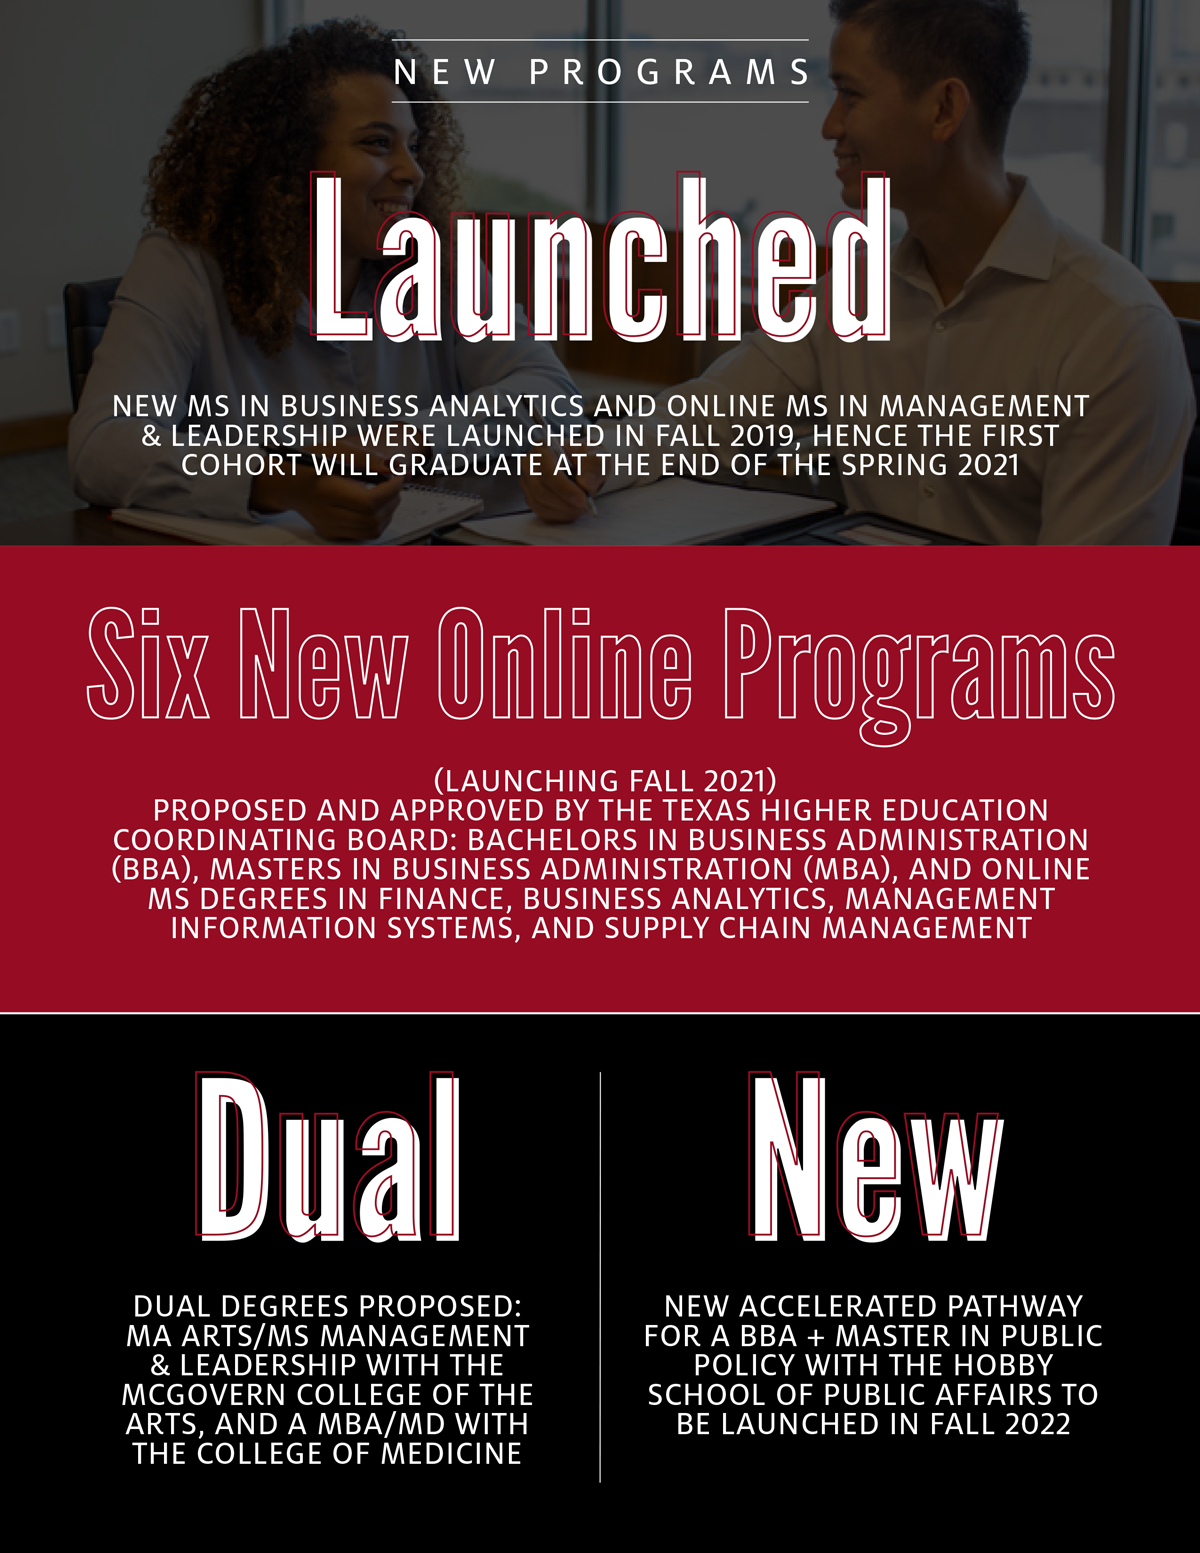 New programs launched